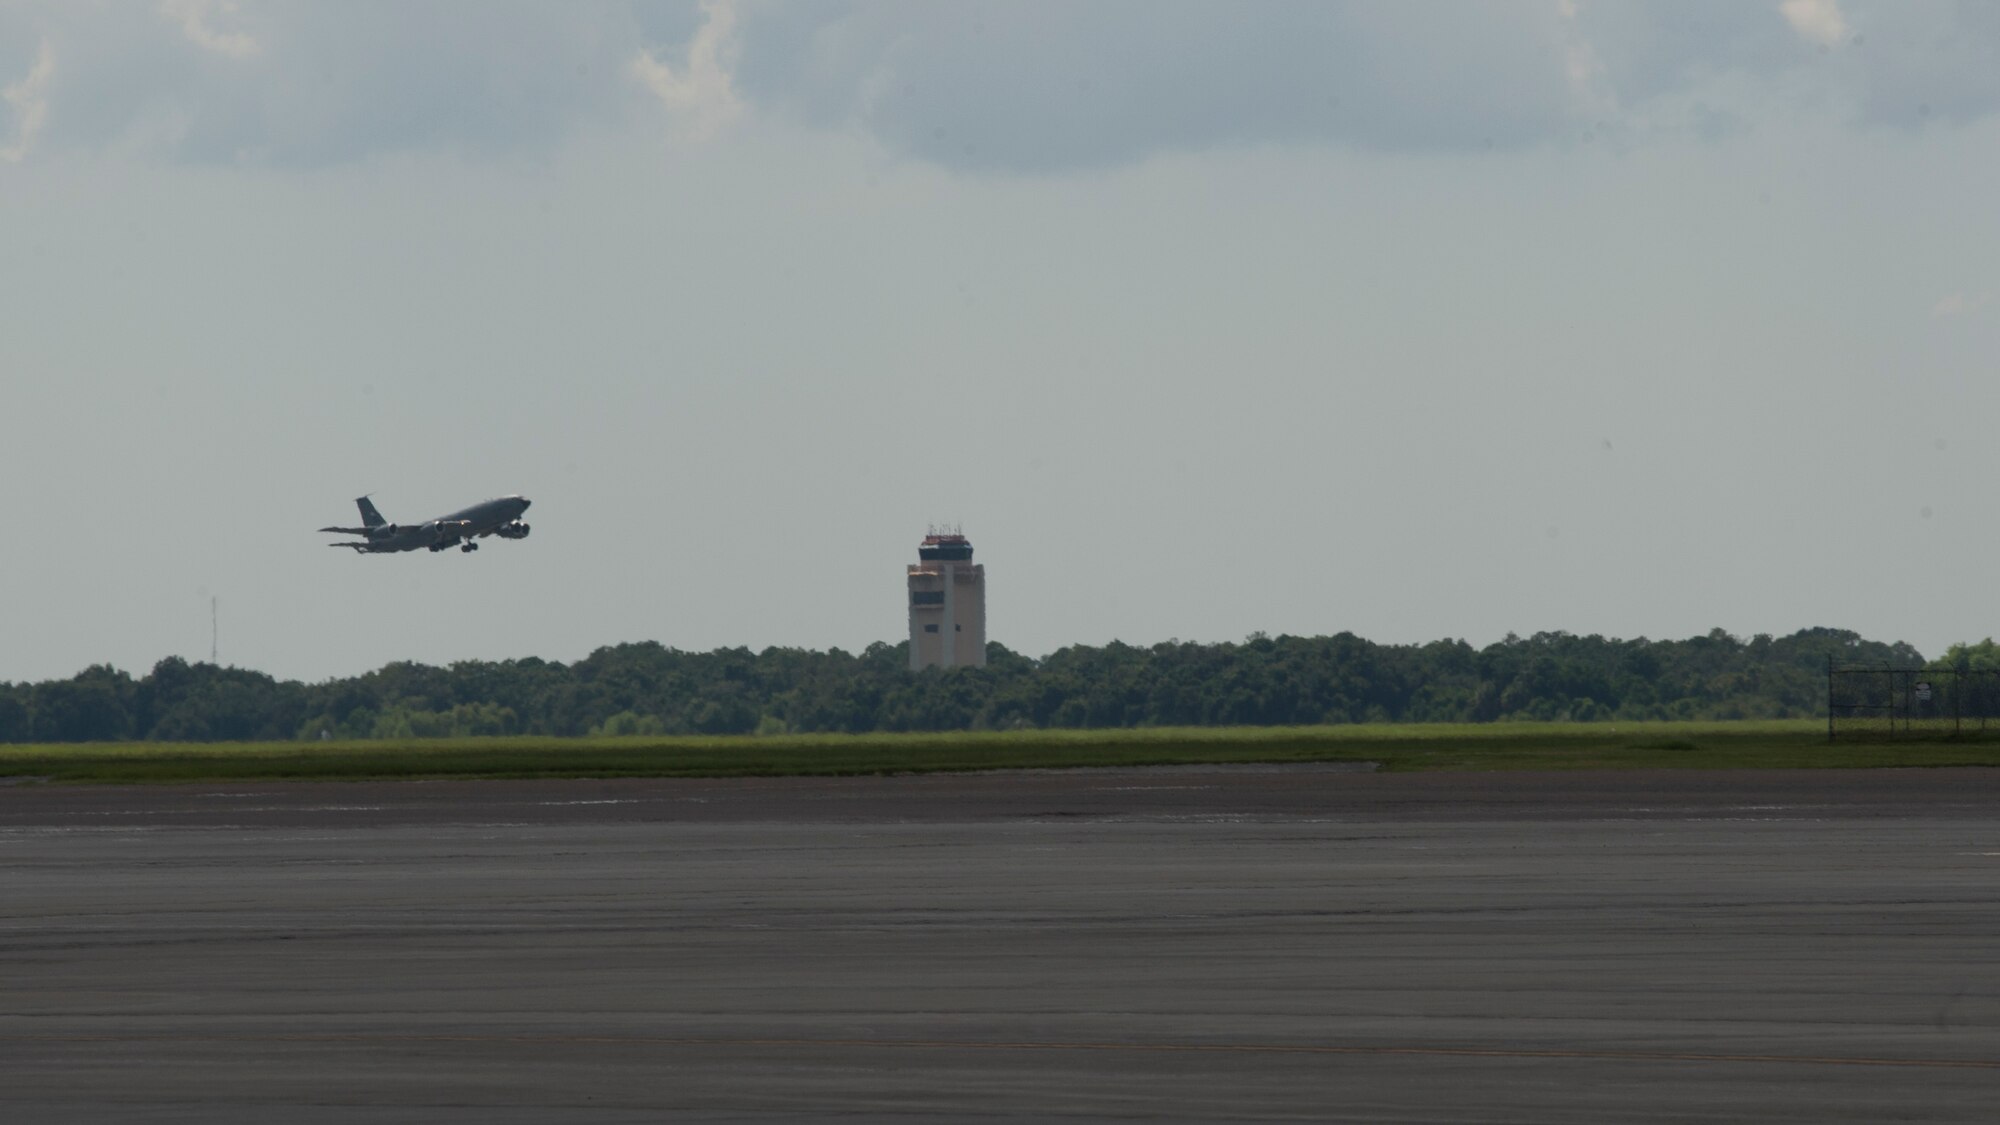 A KC-135 Stratotanker takes-off MacDill Air Force Base, Fla. Aug. 29, 2019.  MacDill’s leadership team ordered the departure of the KC-135’s as a precautionary measure in preparation for Hurricane Dorian. (U.S. Air Force photo by Airman 1st Class Shannon Bowman)